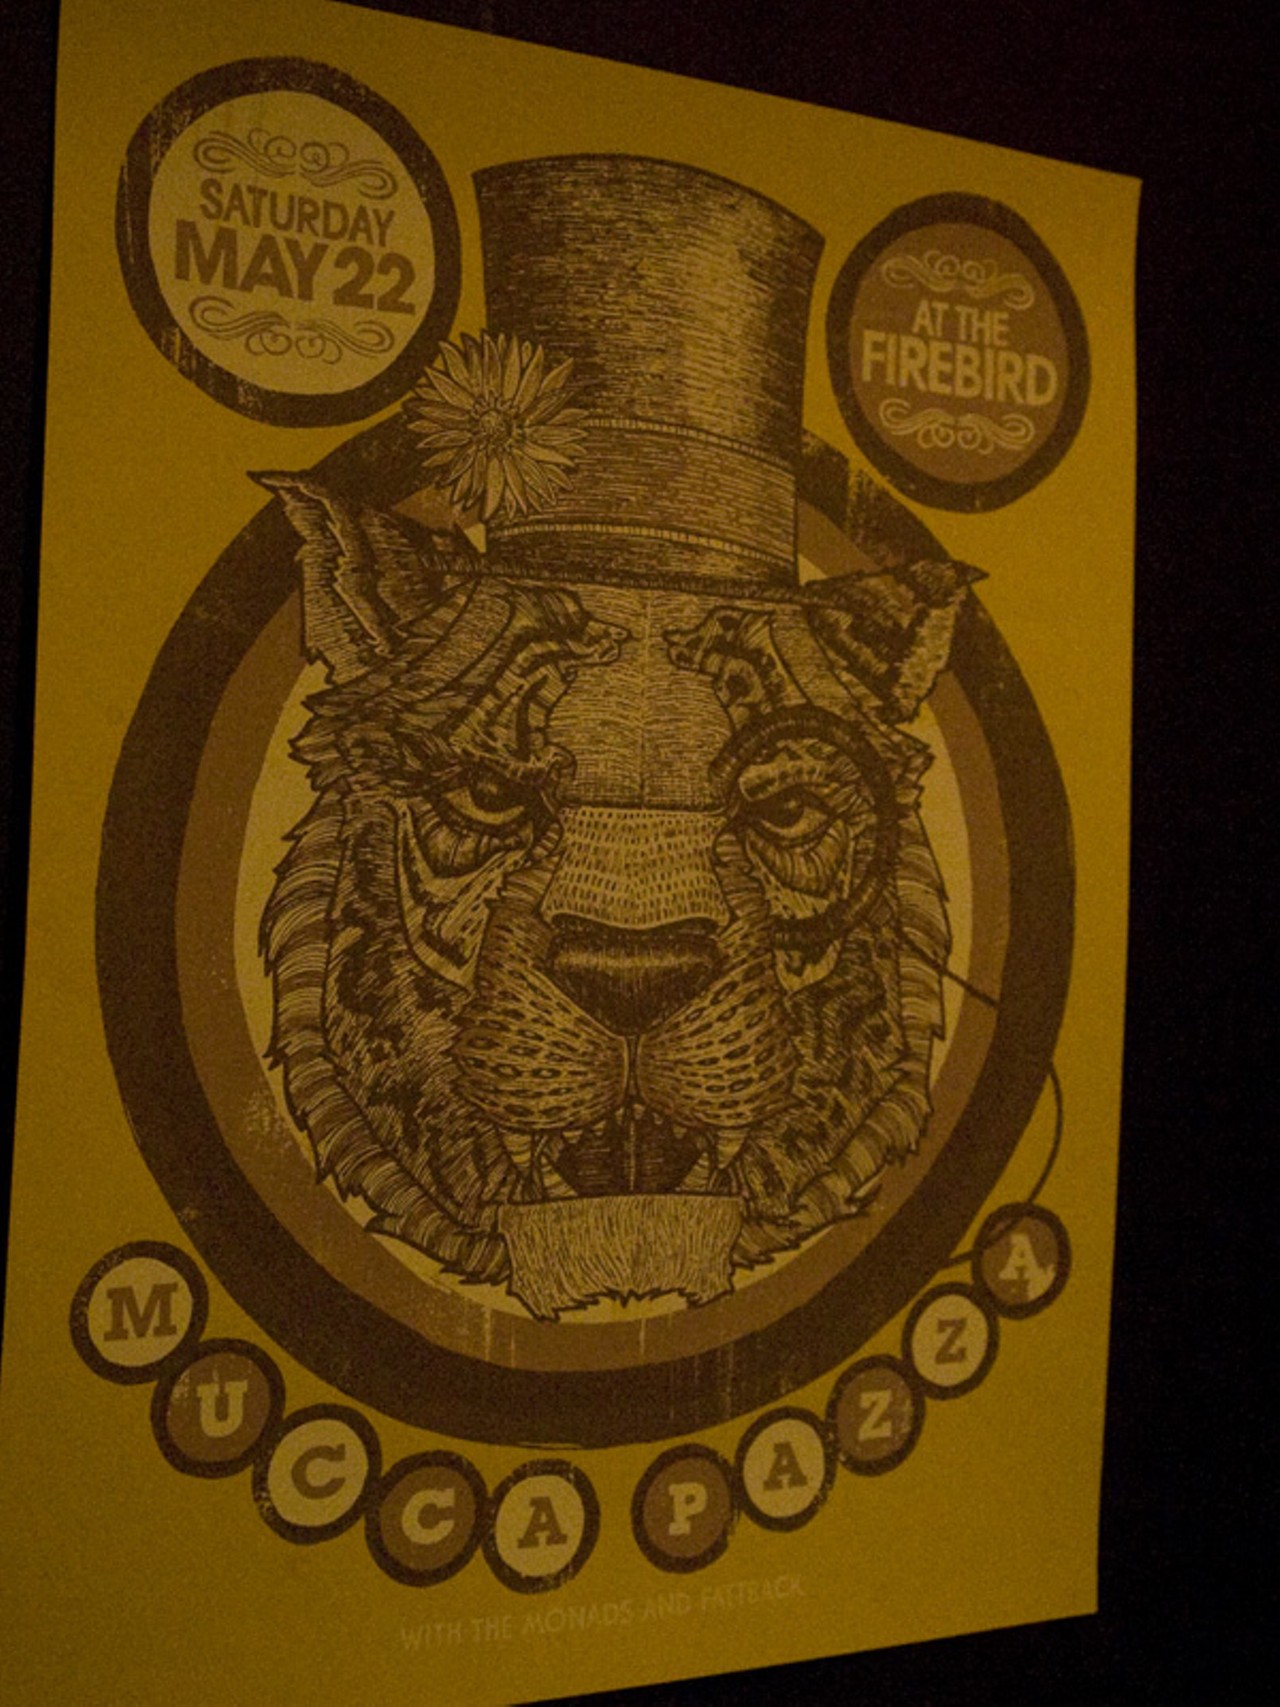 A Mucca Pazza poster for the show